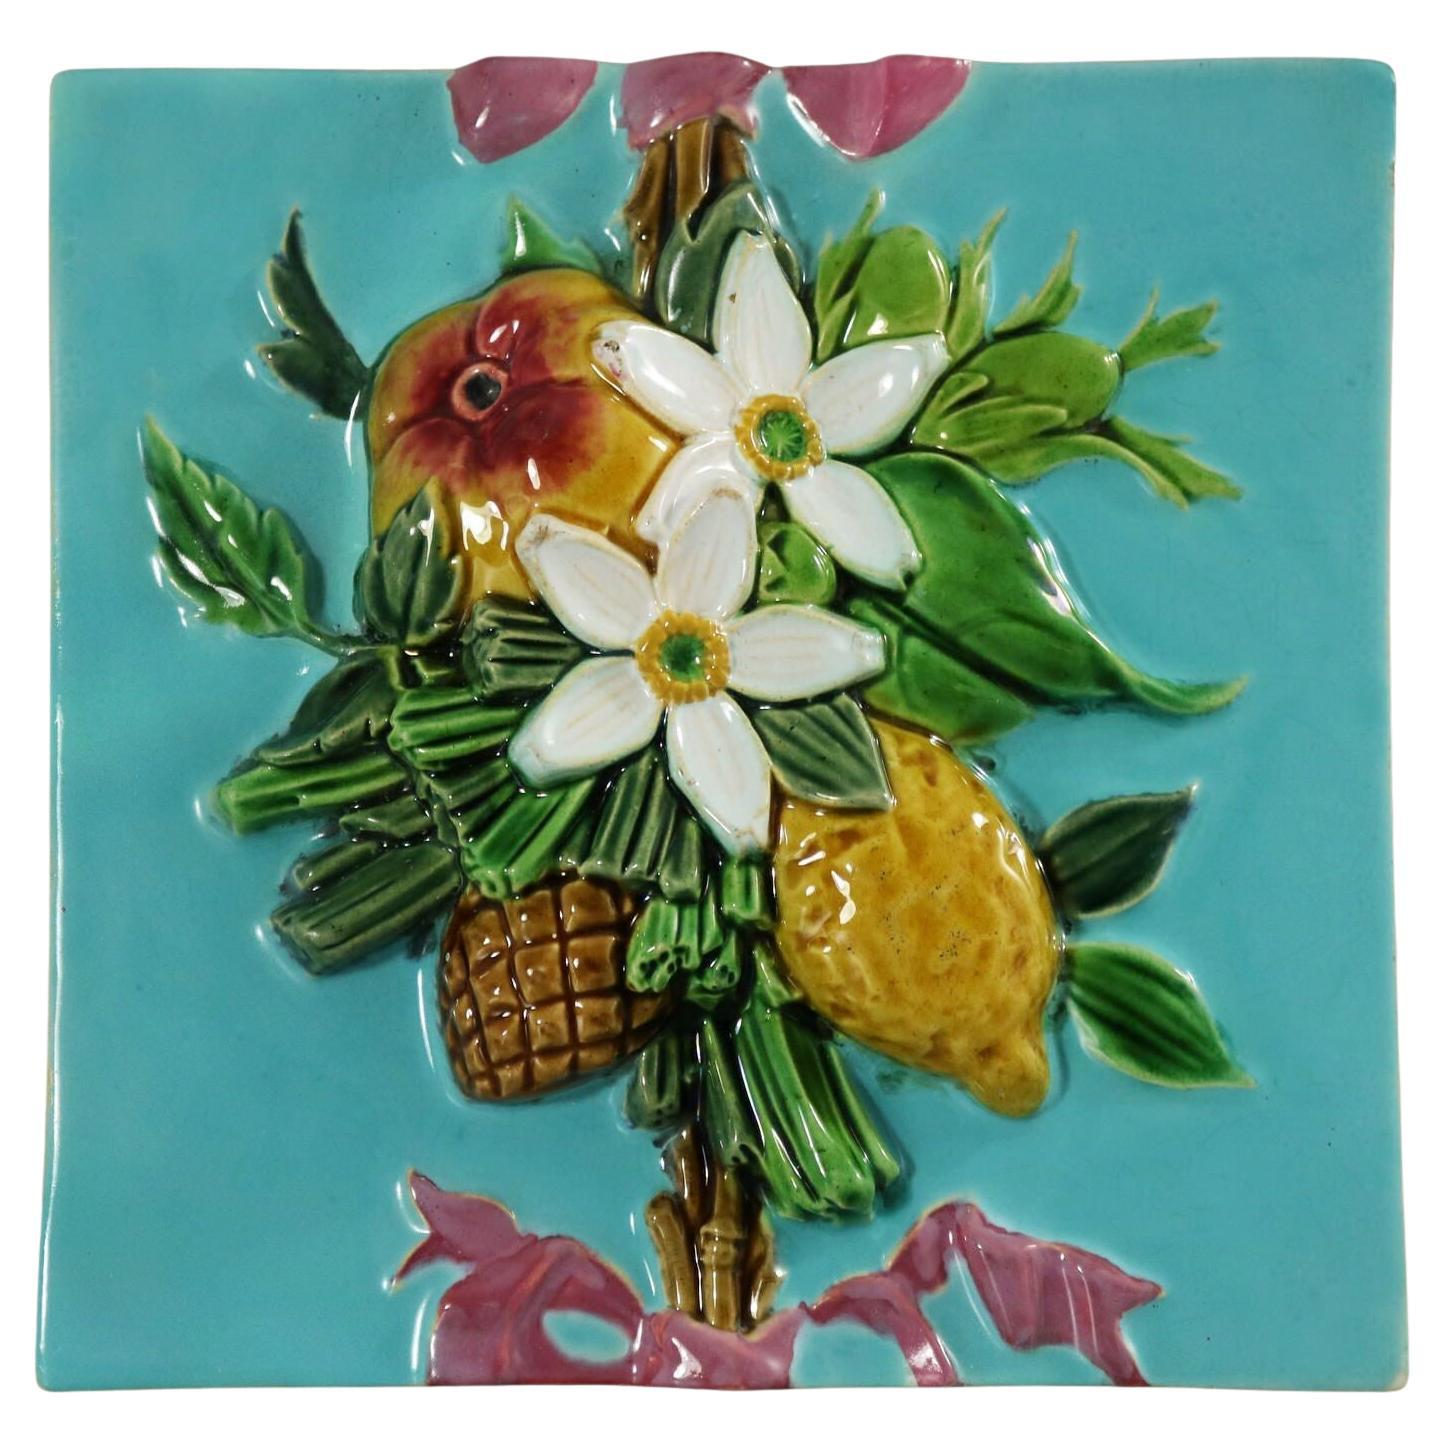 Minton Majolica Fruit and Flowers Tile